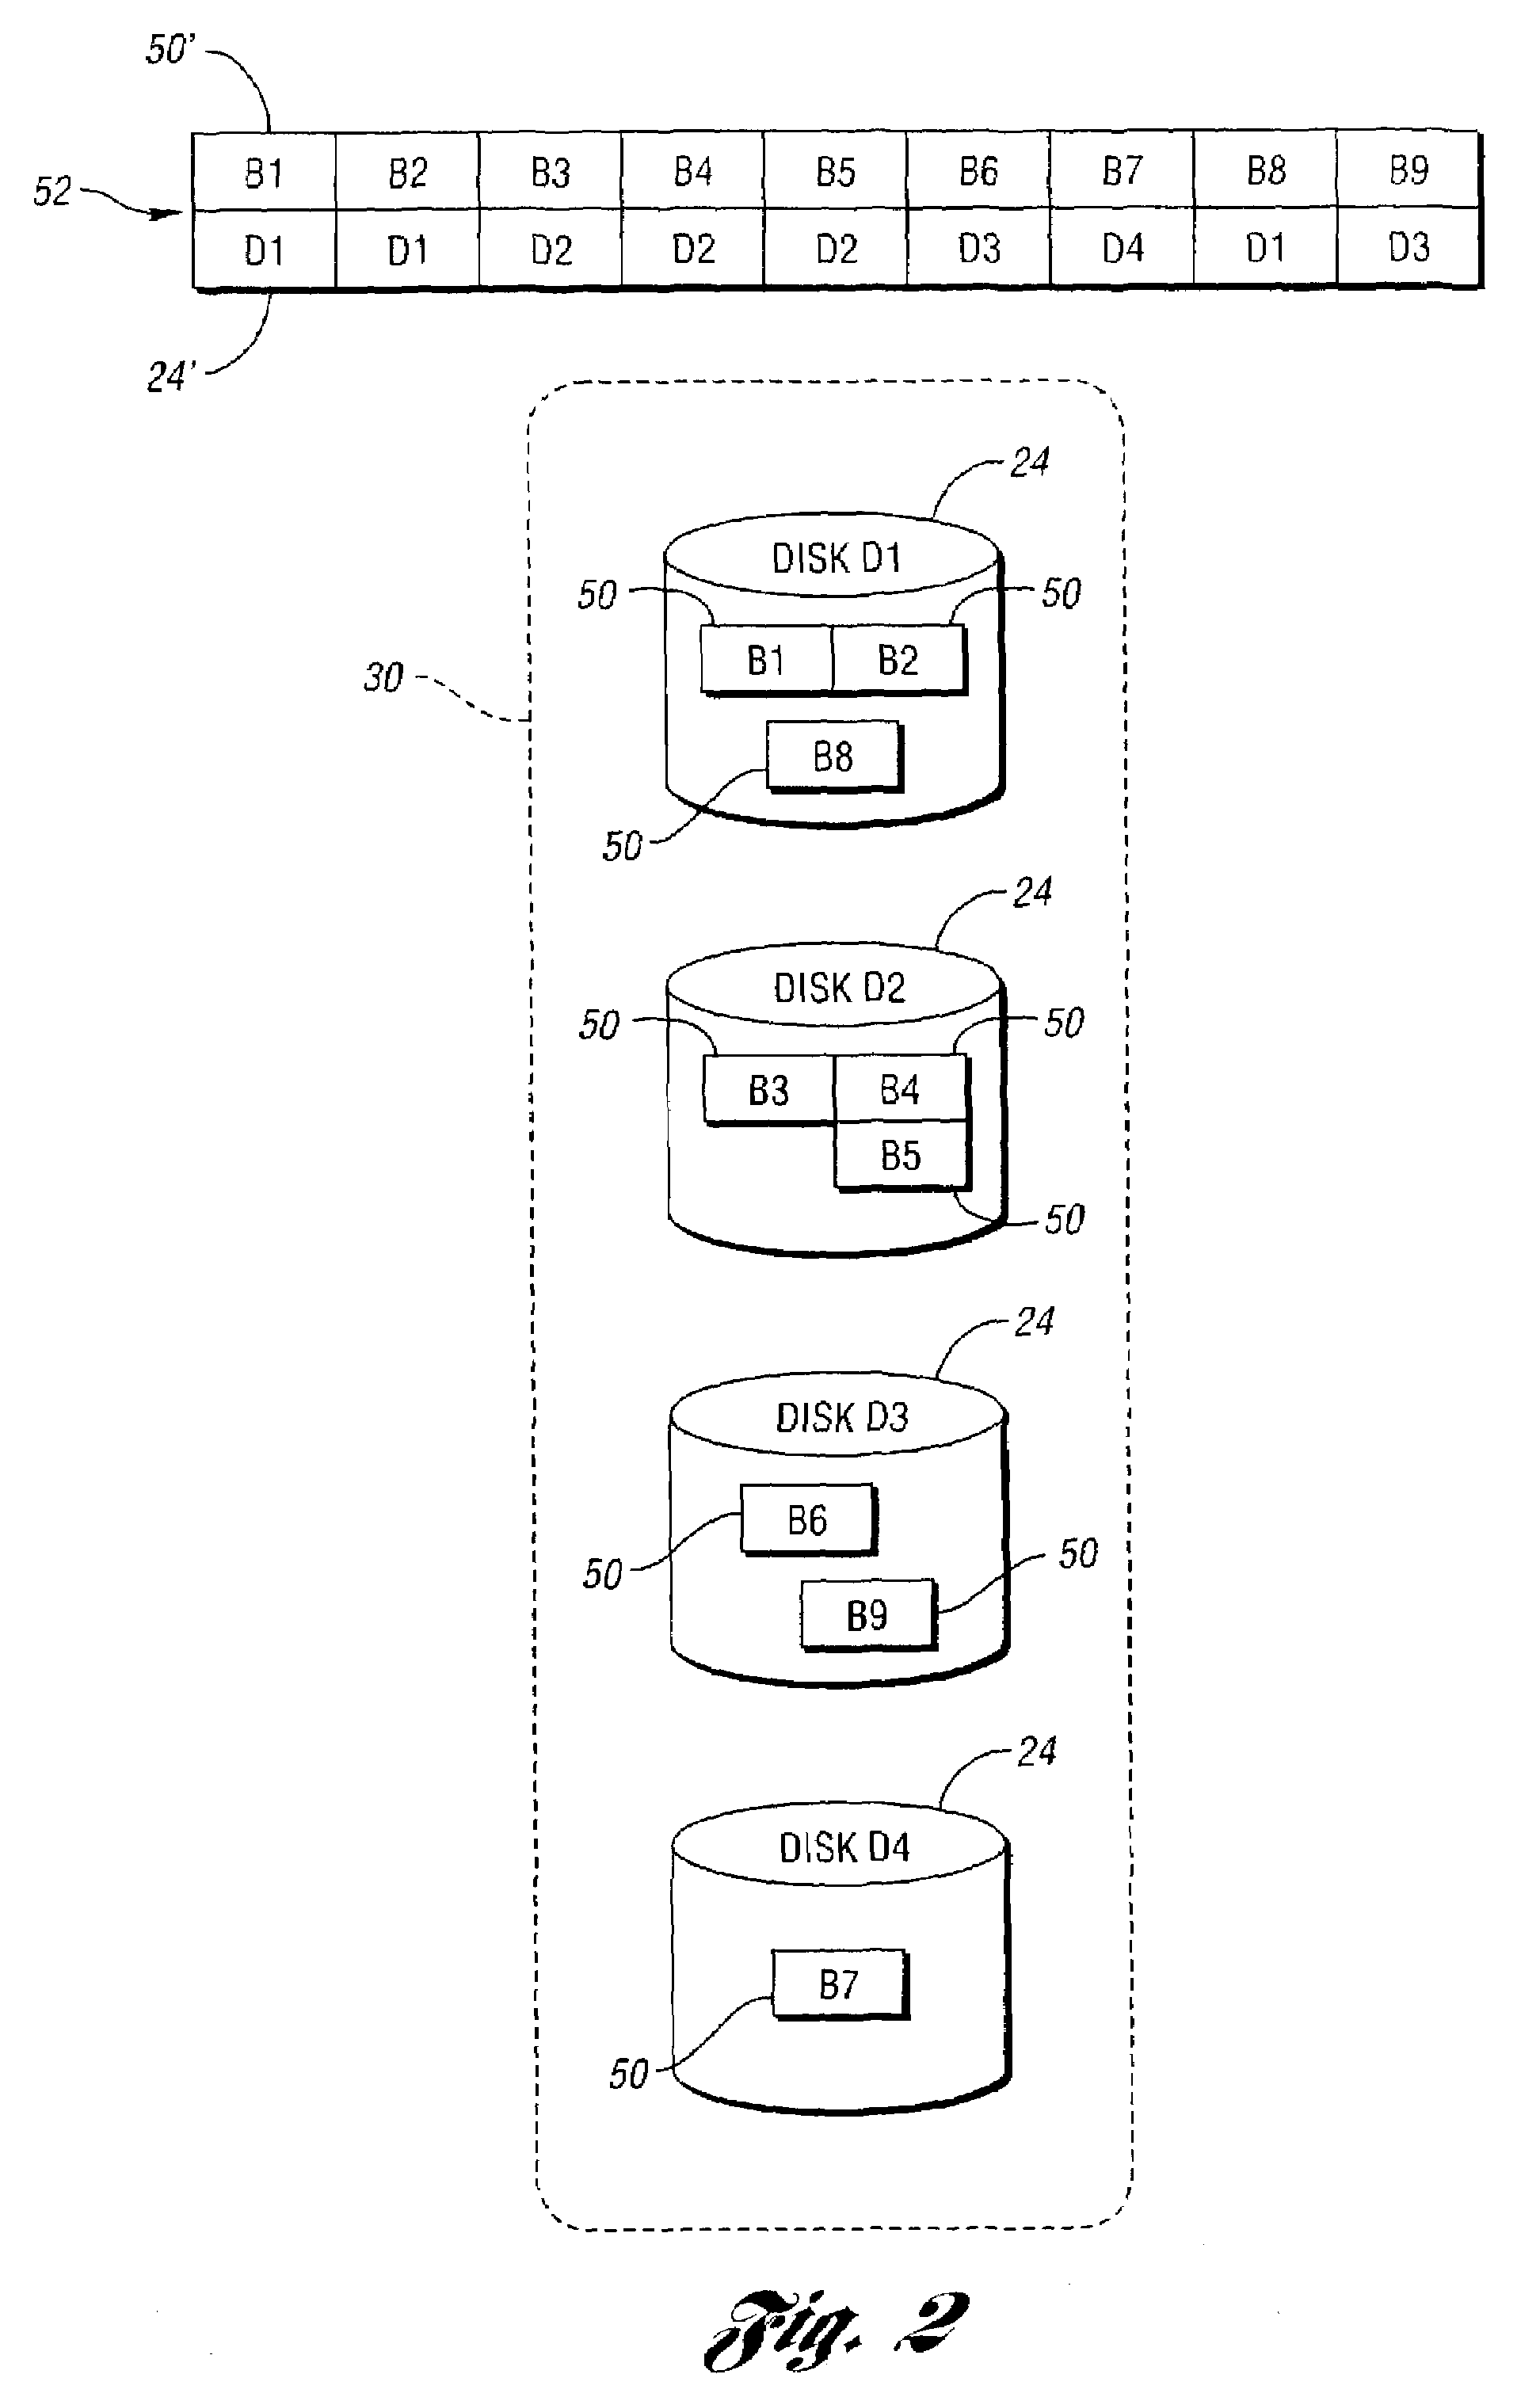 Virtual storage status coalescing with a plurality of physical storage devices